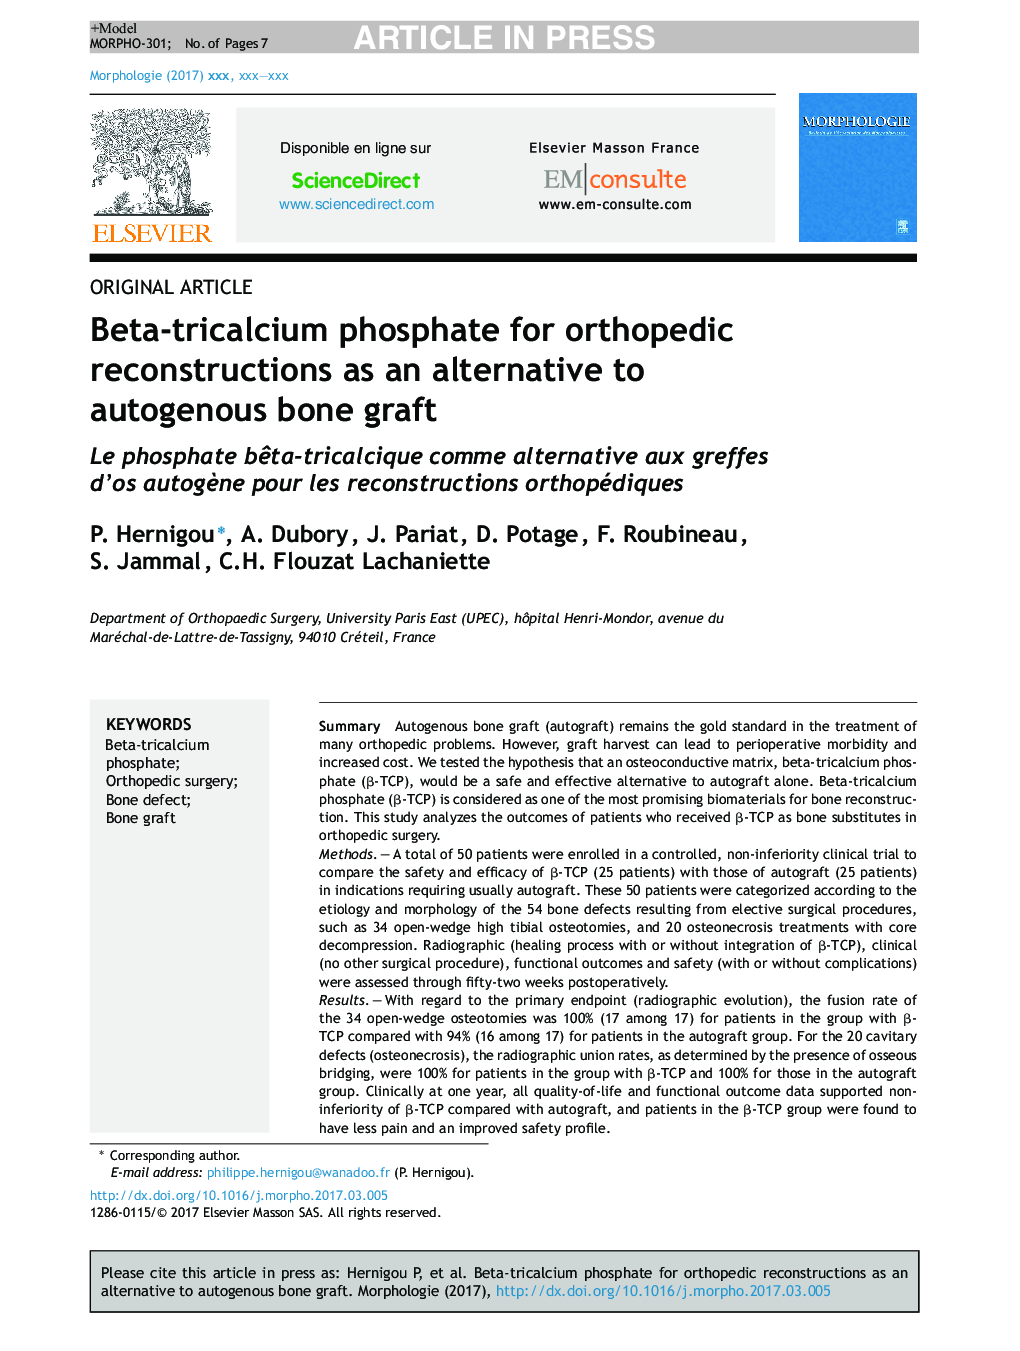 Beta-tricalcium phosphate for orthopedic reconstructions as an alternative to autogenous bone graft